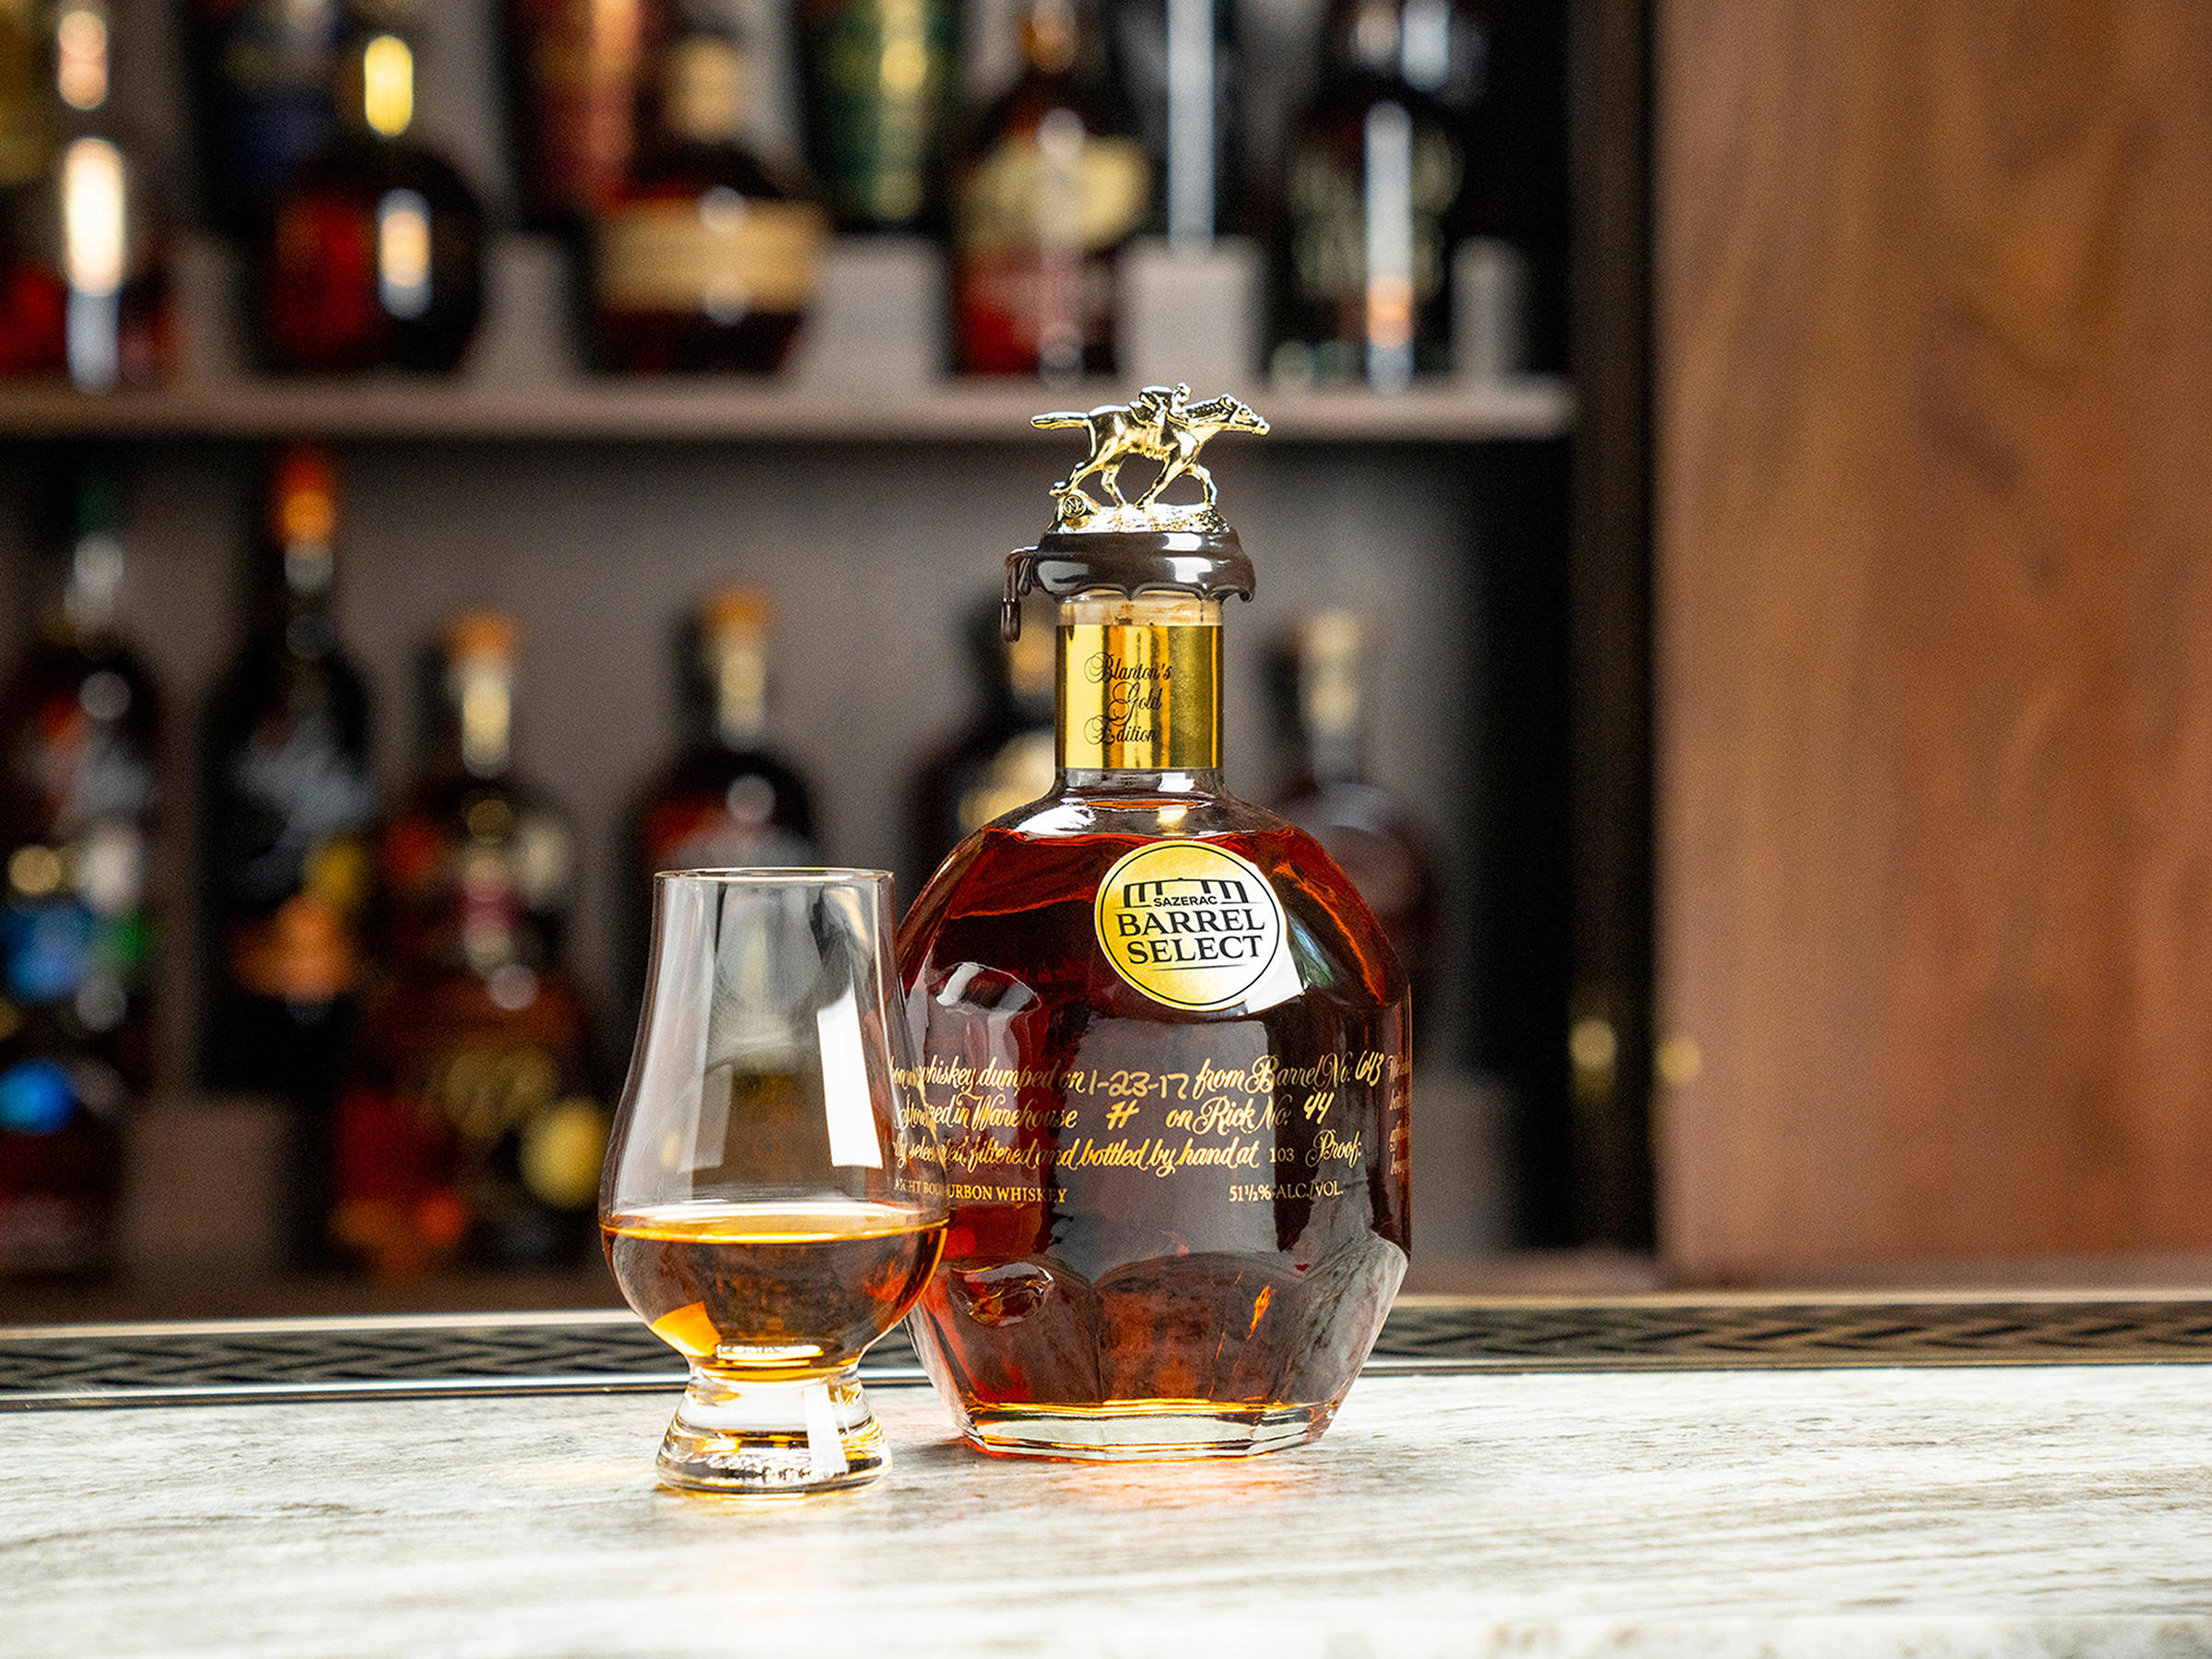 Blanton’s Gold Barrel Charity Sweepstakes Drives $1M Donation to St. Jude